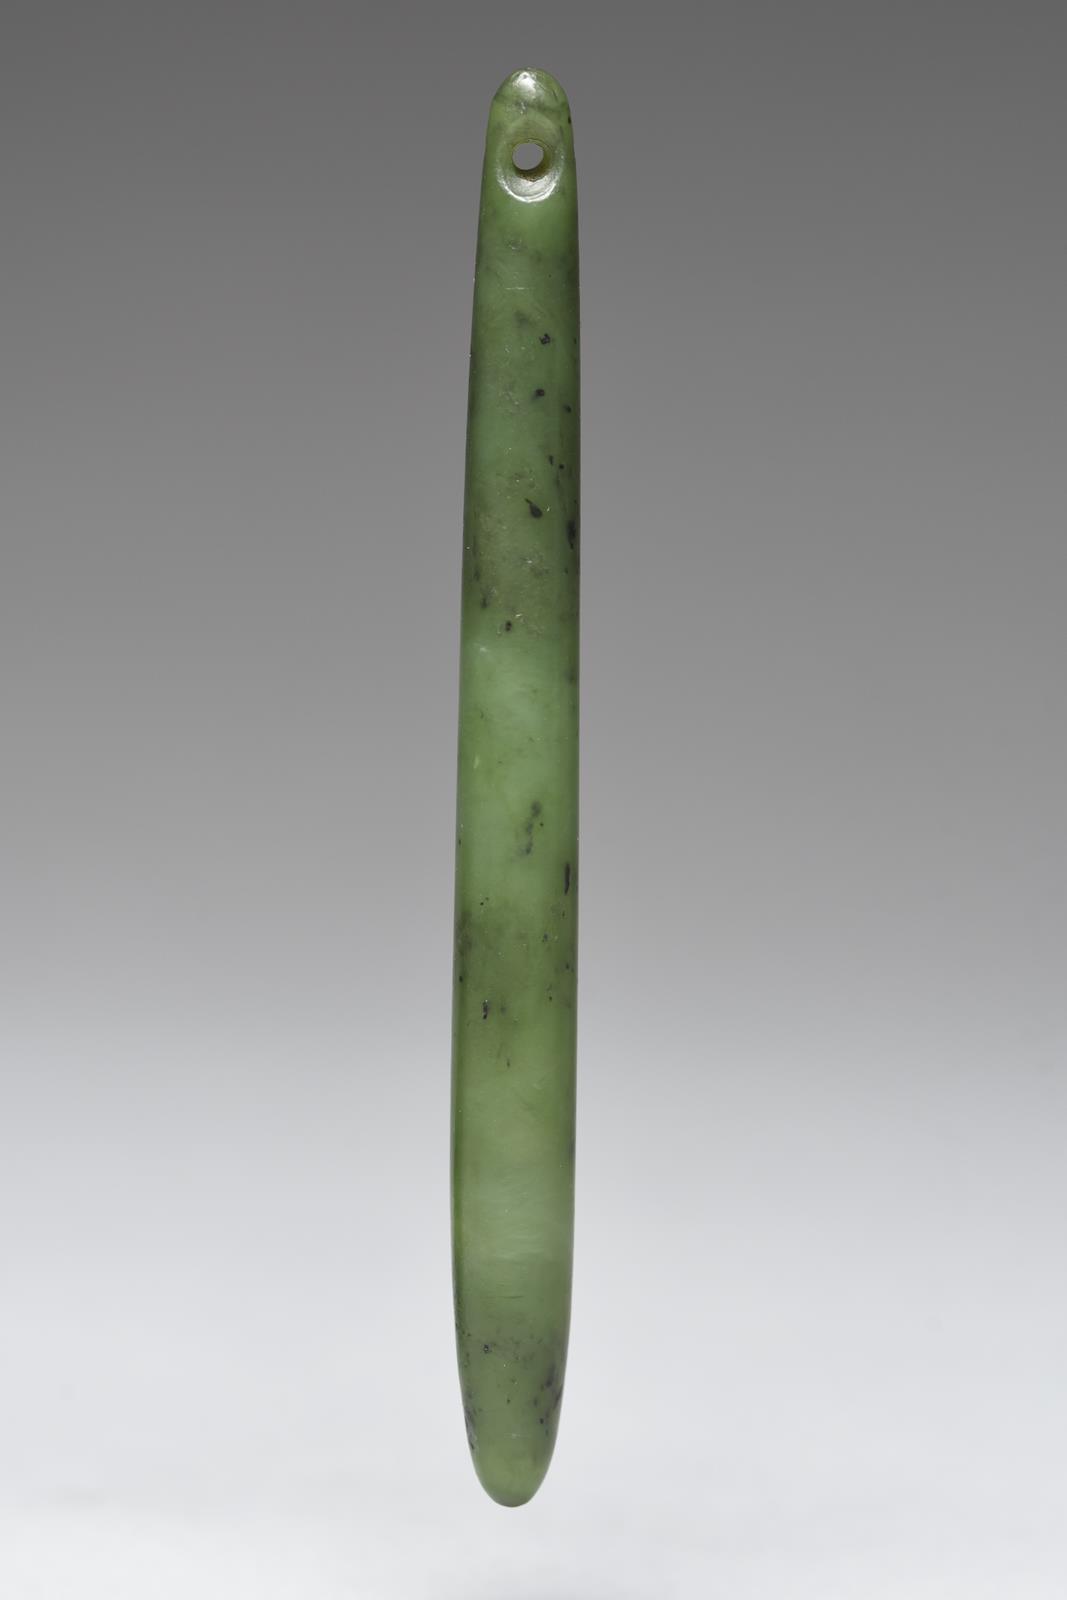 A Maori ear pendant New Zealand nephrite, with a pierced suspension hole to the top, 12.2cm long.